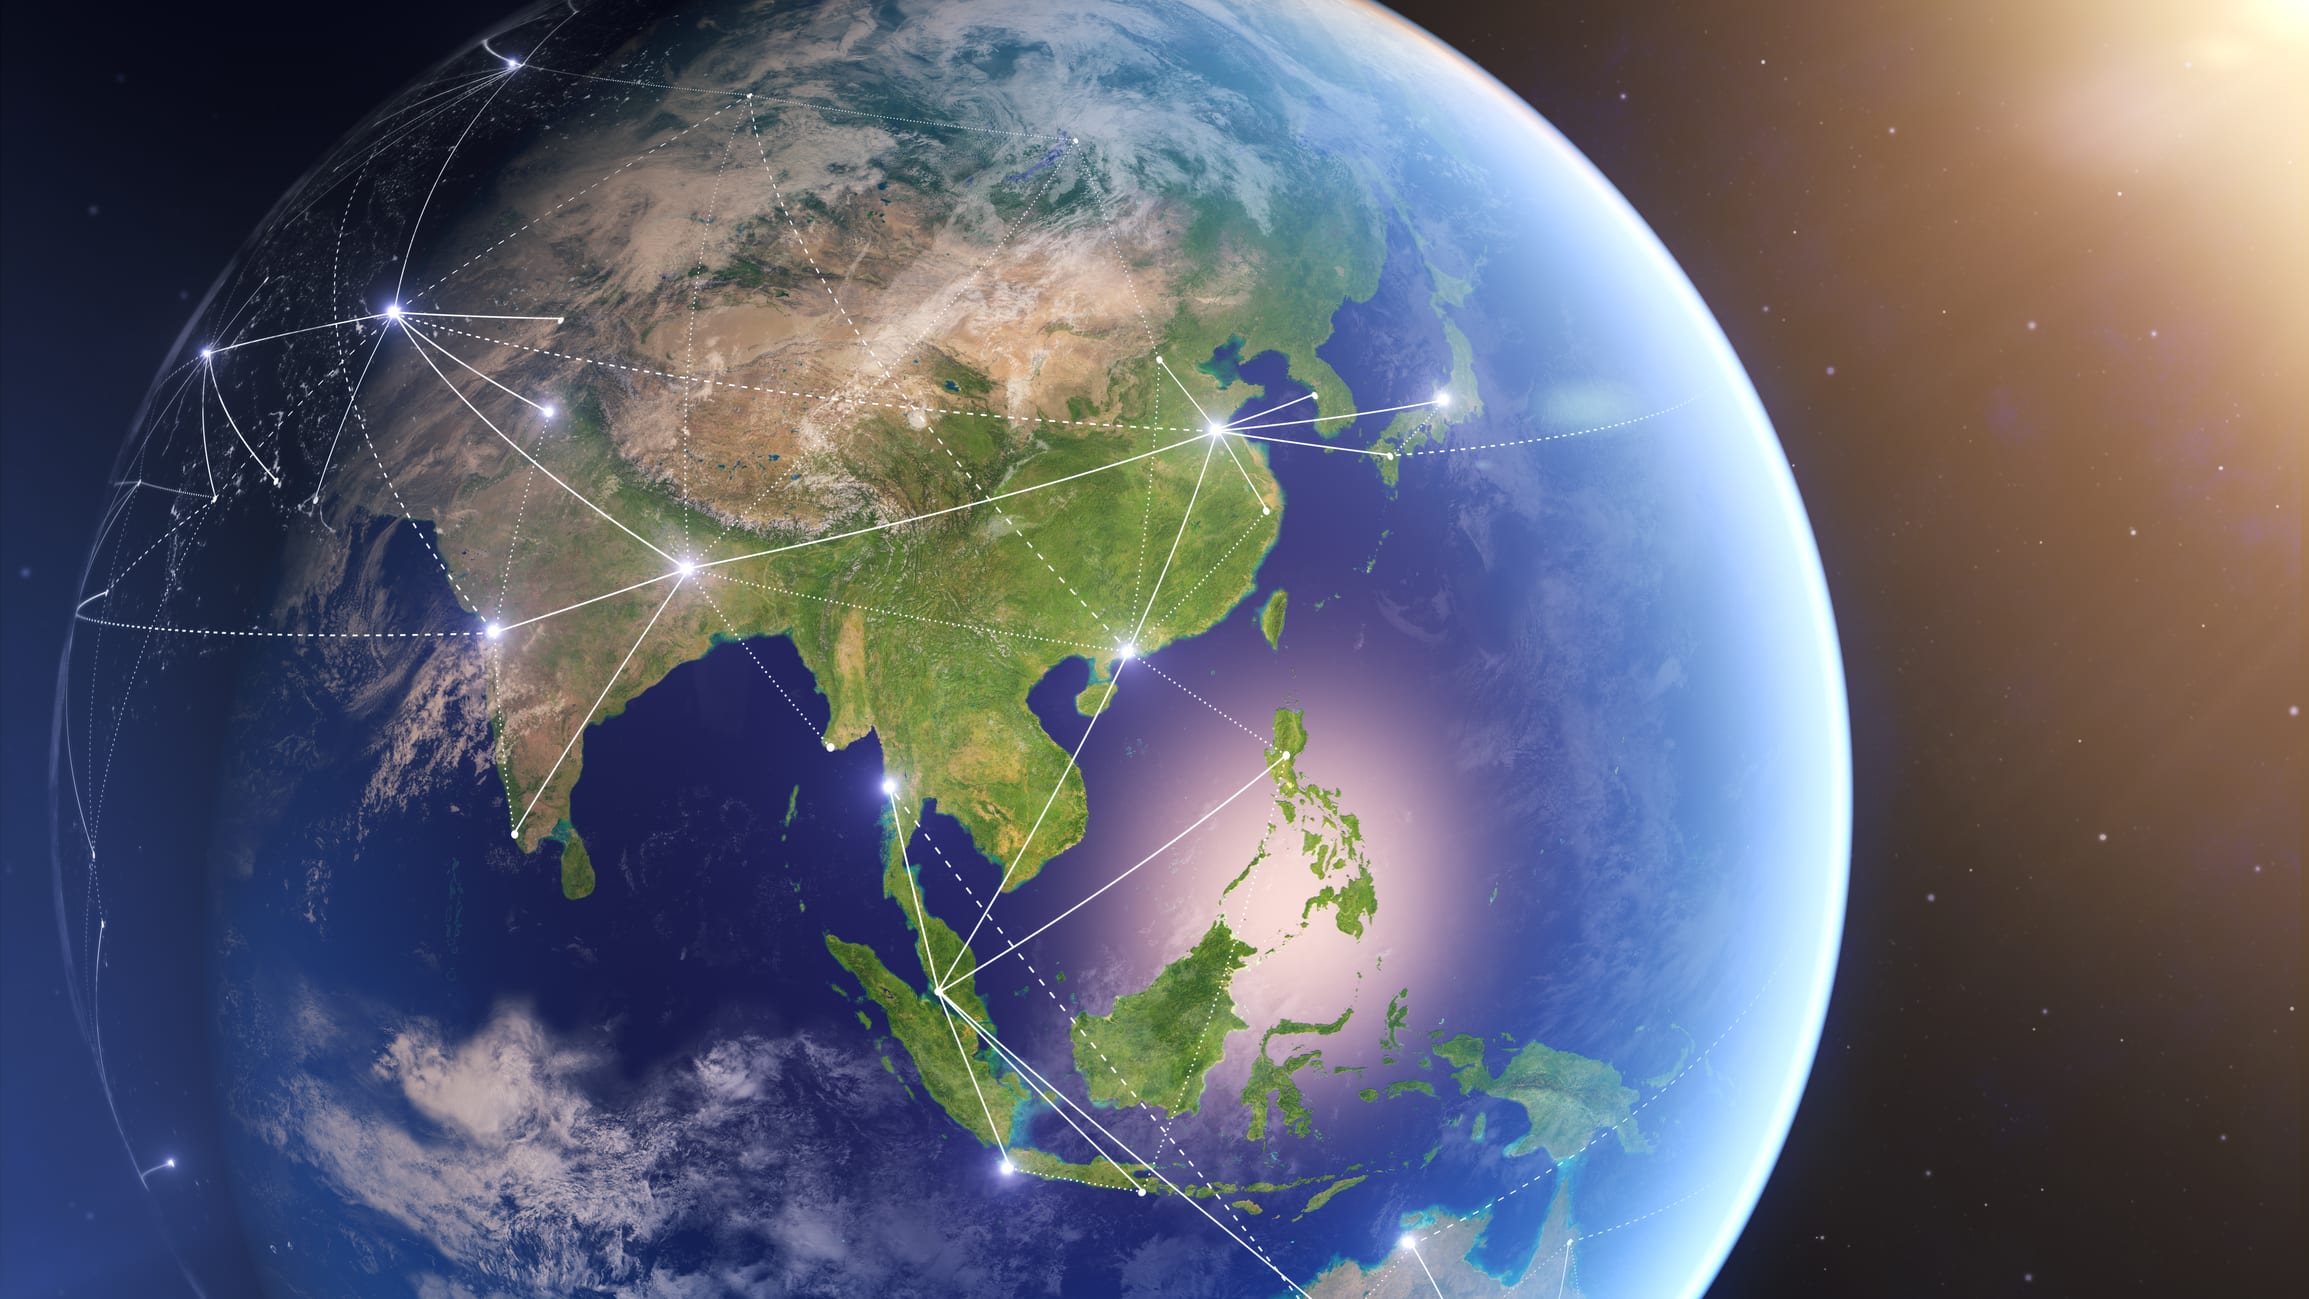 New policies drive infrastructure investment in Asia Pacific: Private capital is welcome